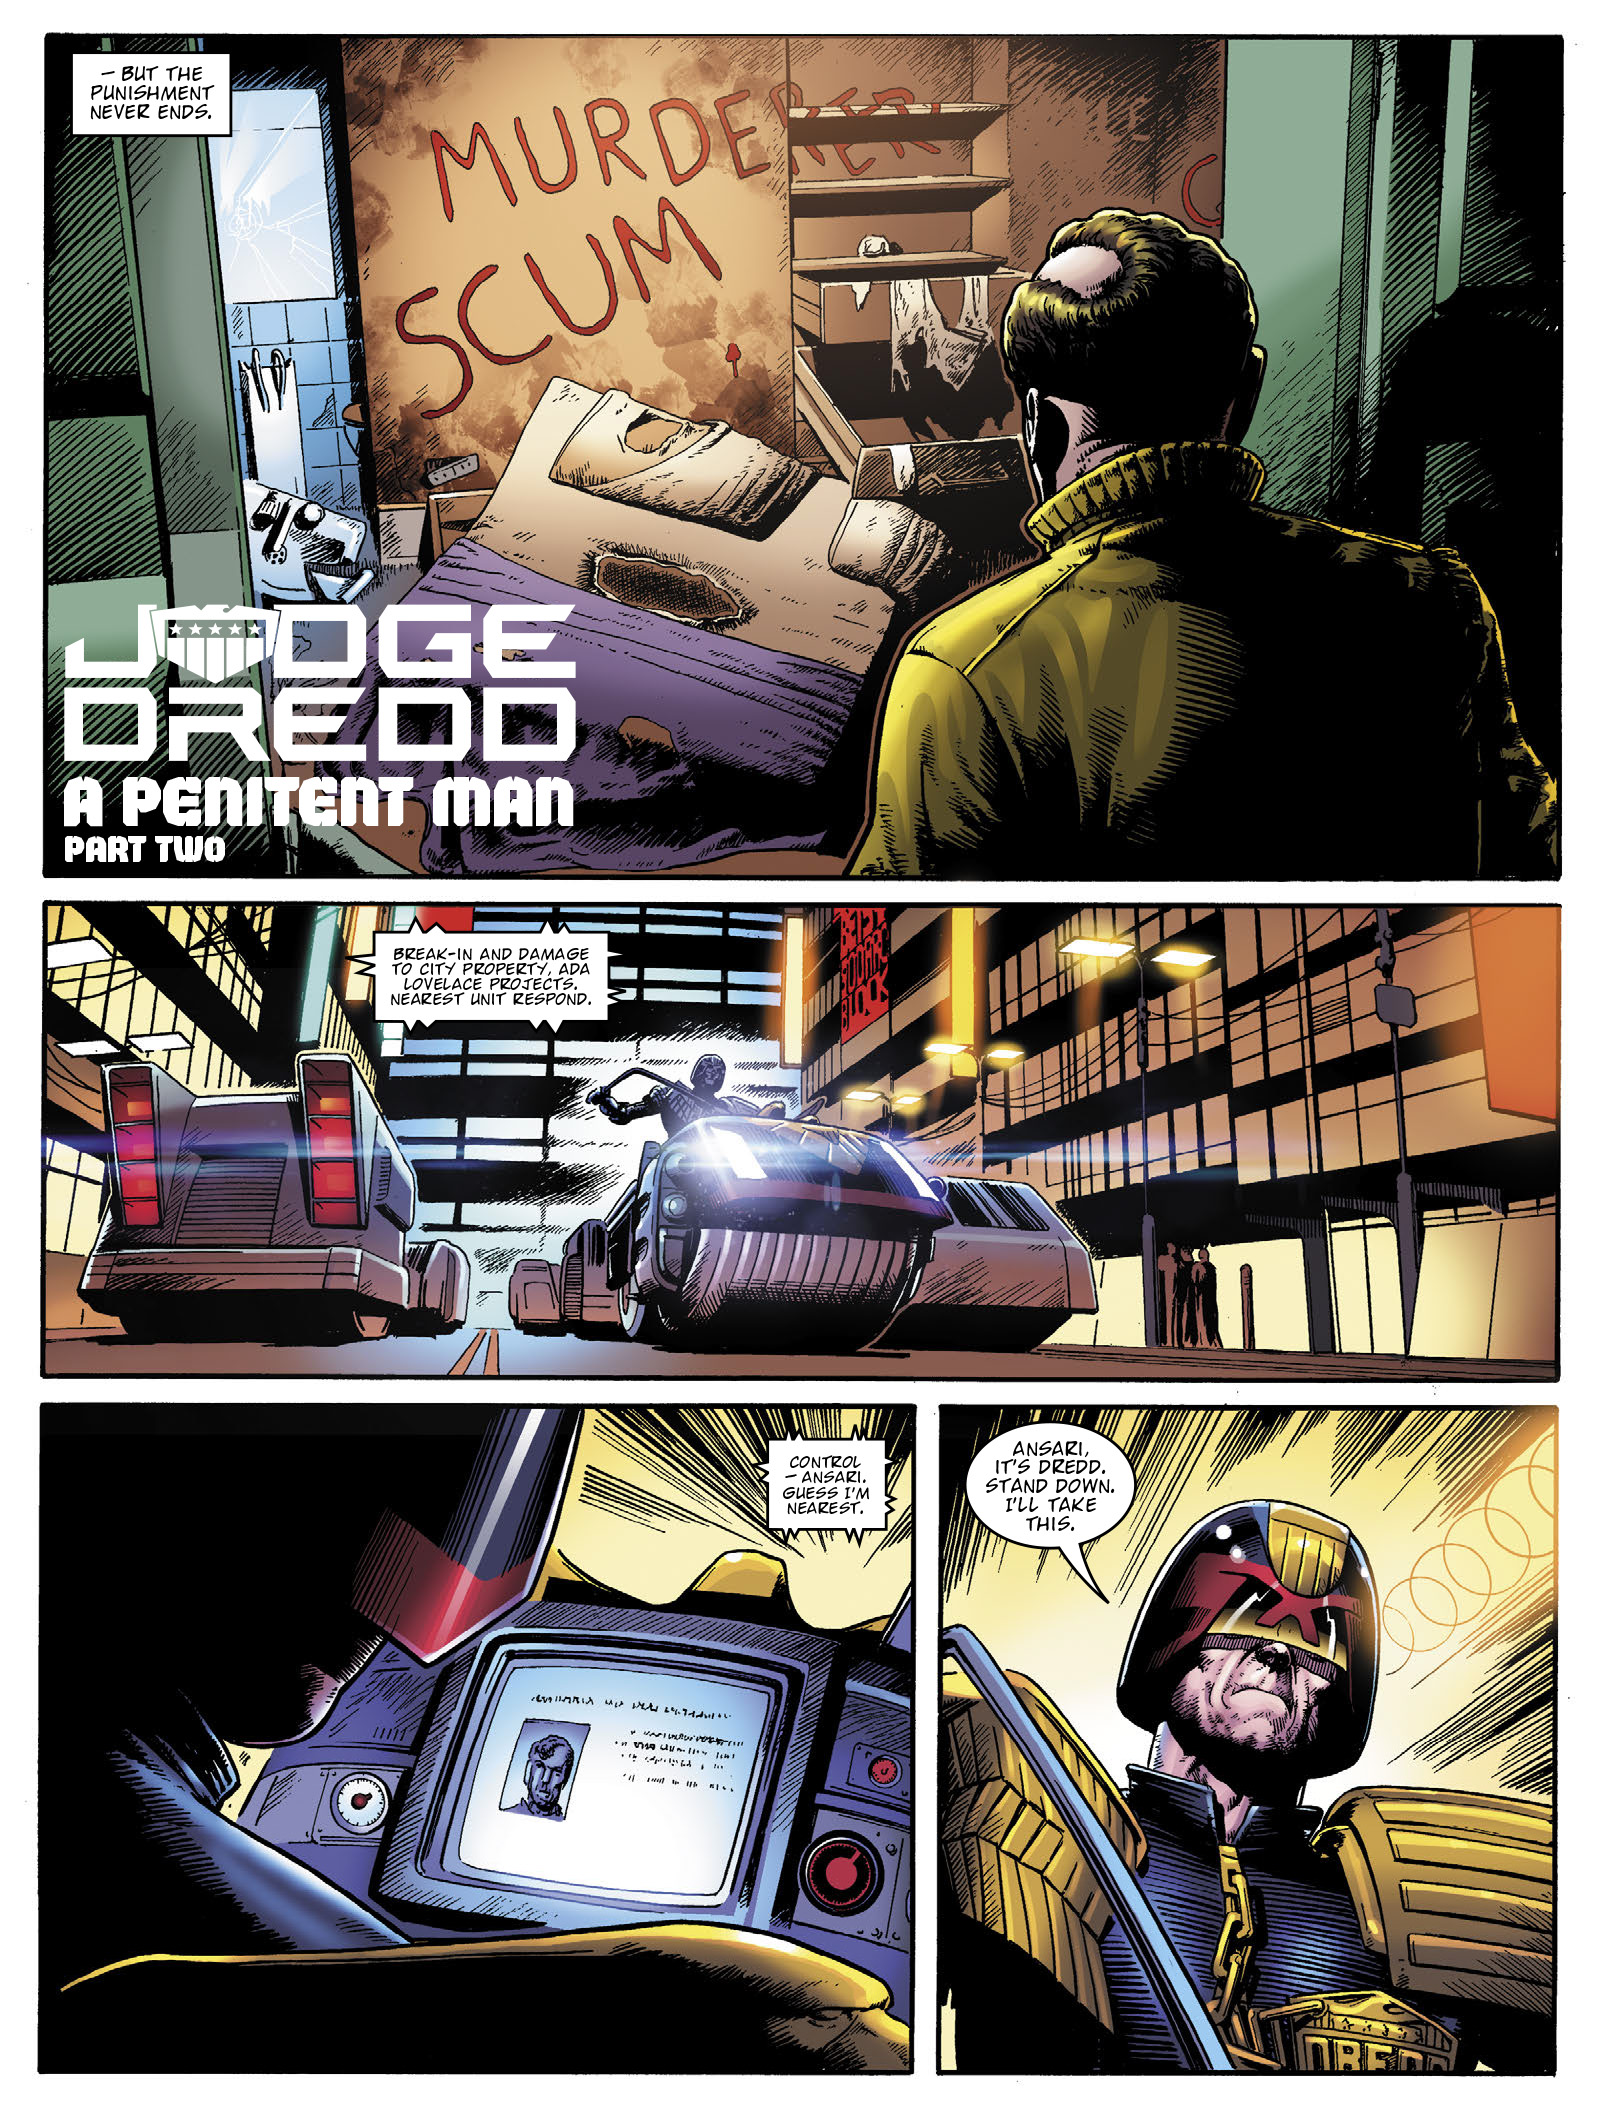 2000 AD: Chapter 2226 - Page 4